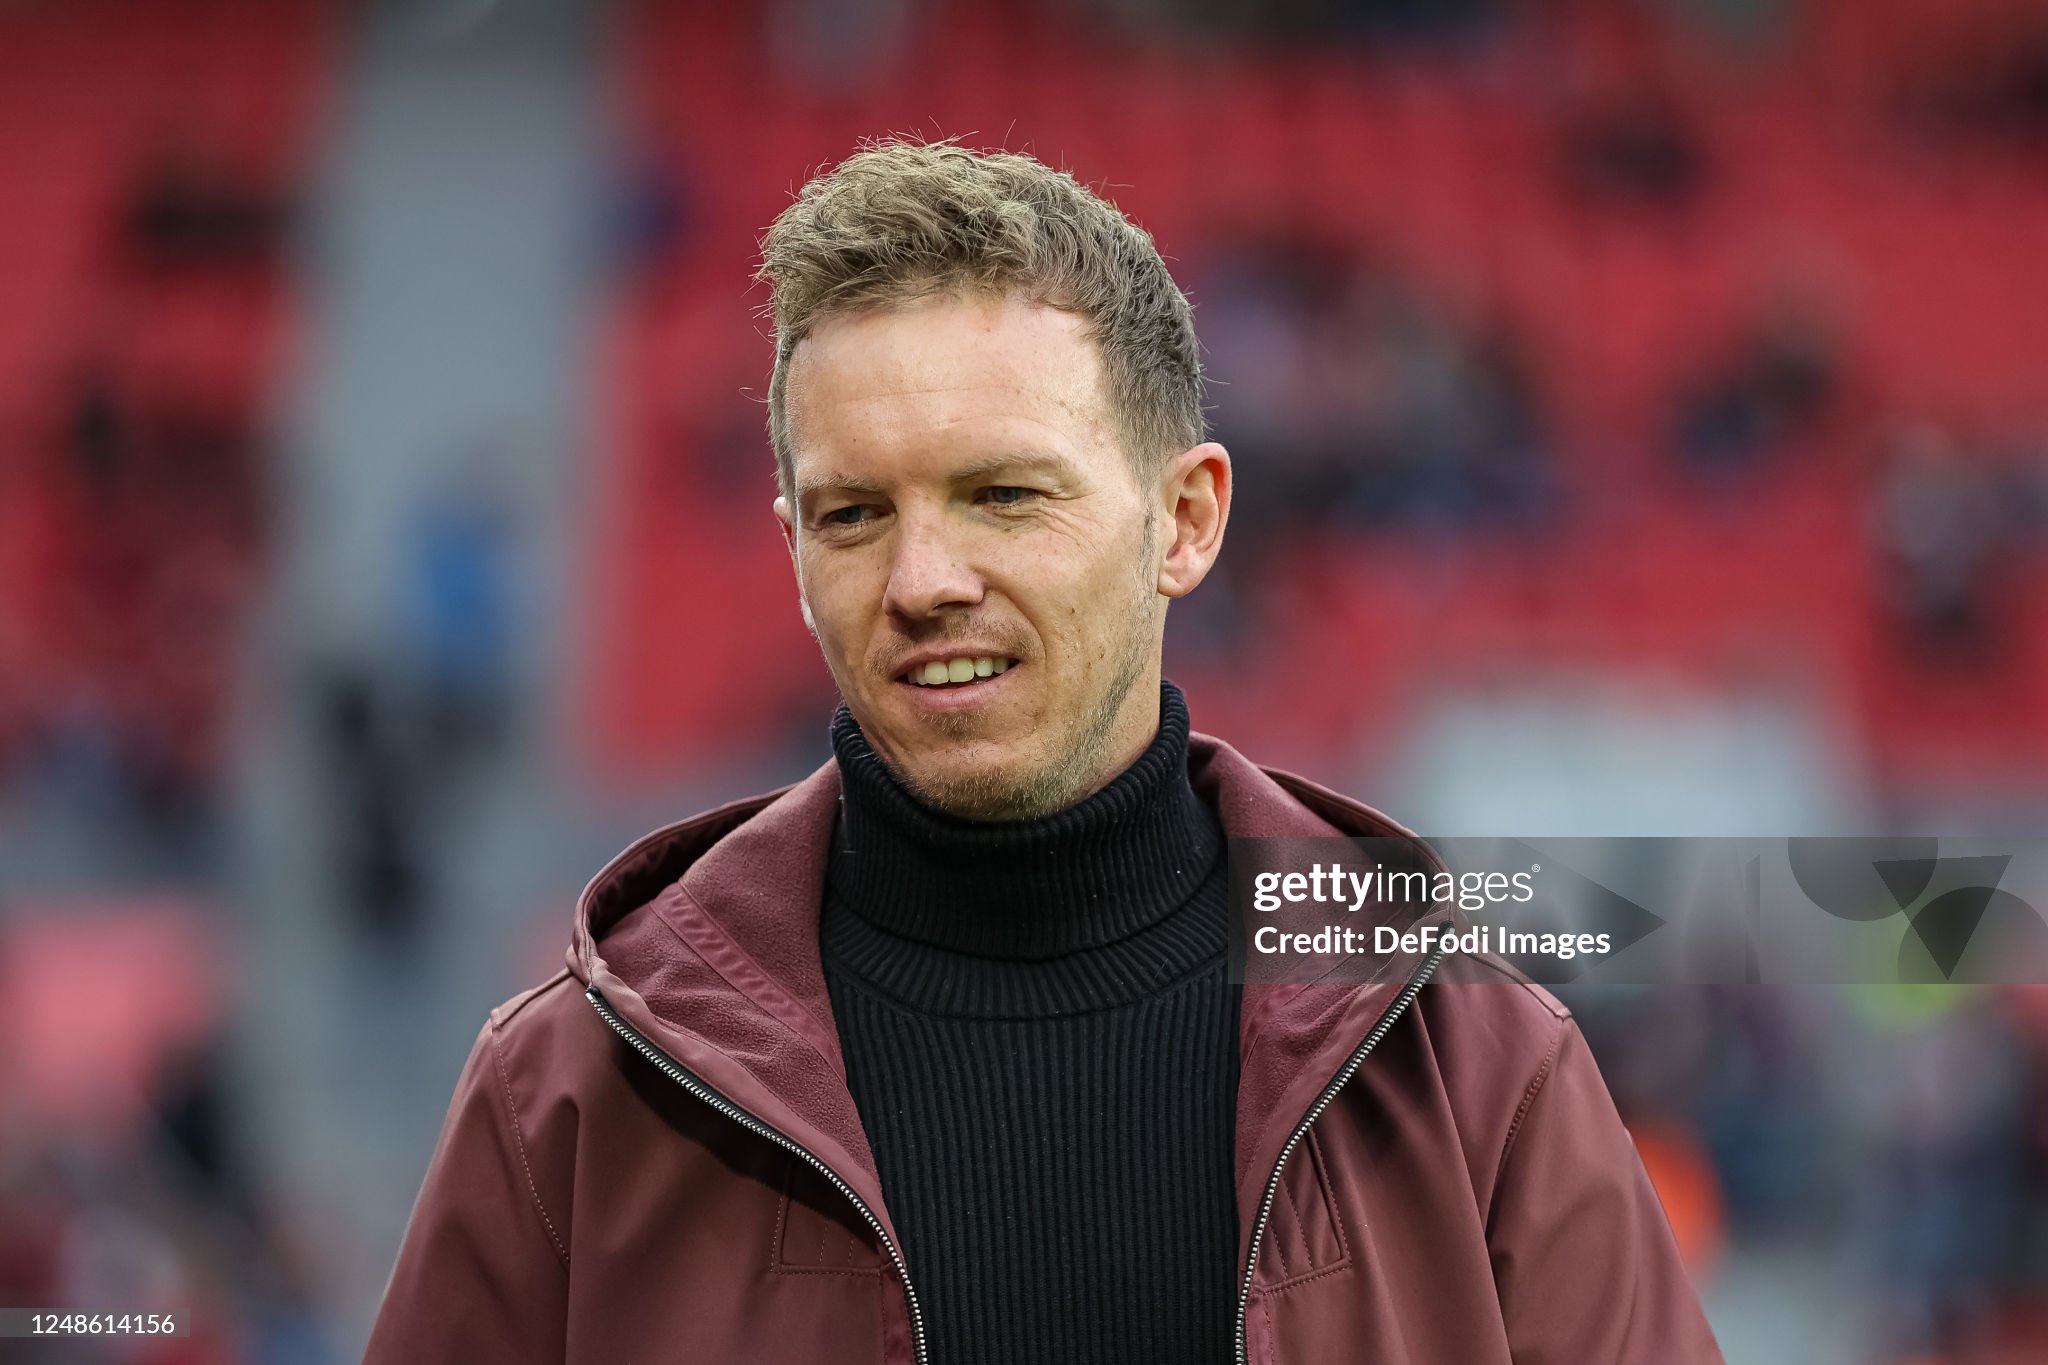 Germany edge closer to appointing Julian Nagelsmann